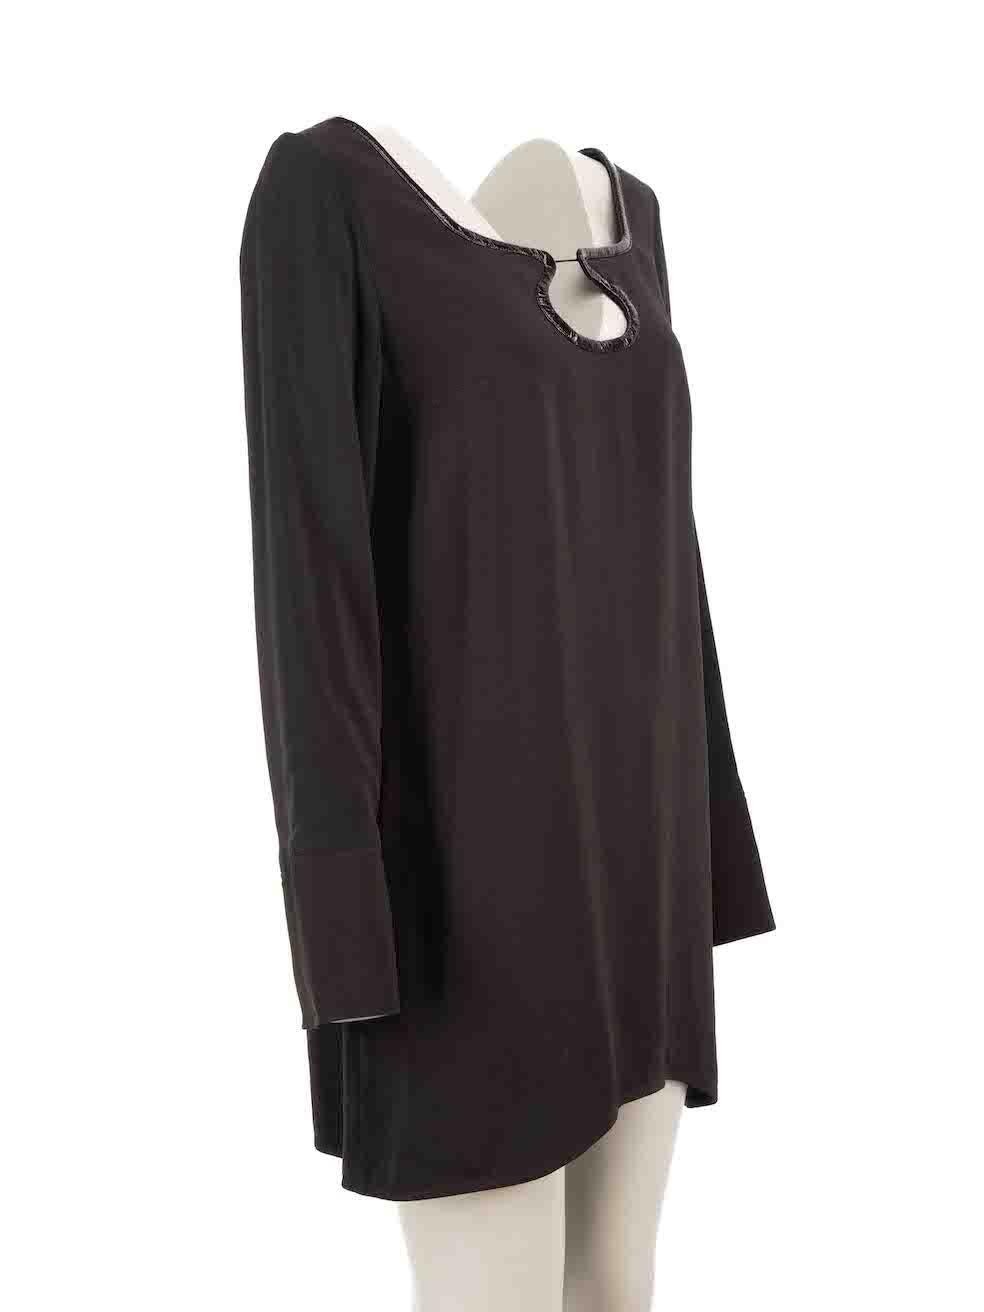 CONDITION is Very good. Hardly any visible wear to dress is evident on this used Courrges designer resale item.
 
Details
Black
Viscose
Dress
Mini
Square neck
Cut-out detail
Long sleeves
Back zip and hook fastening
 
Made in UK
 
Composition
63%